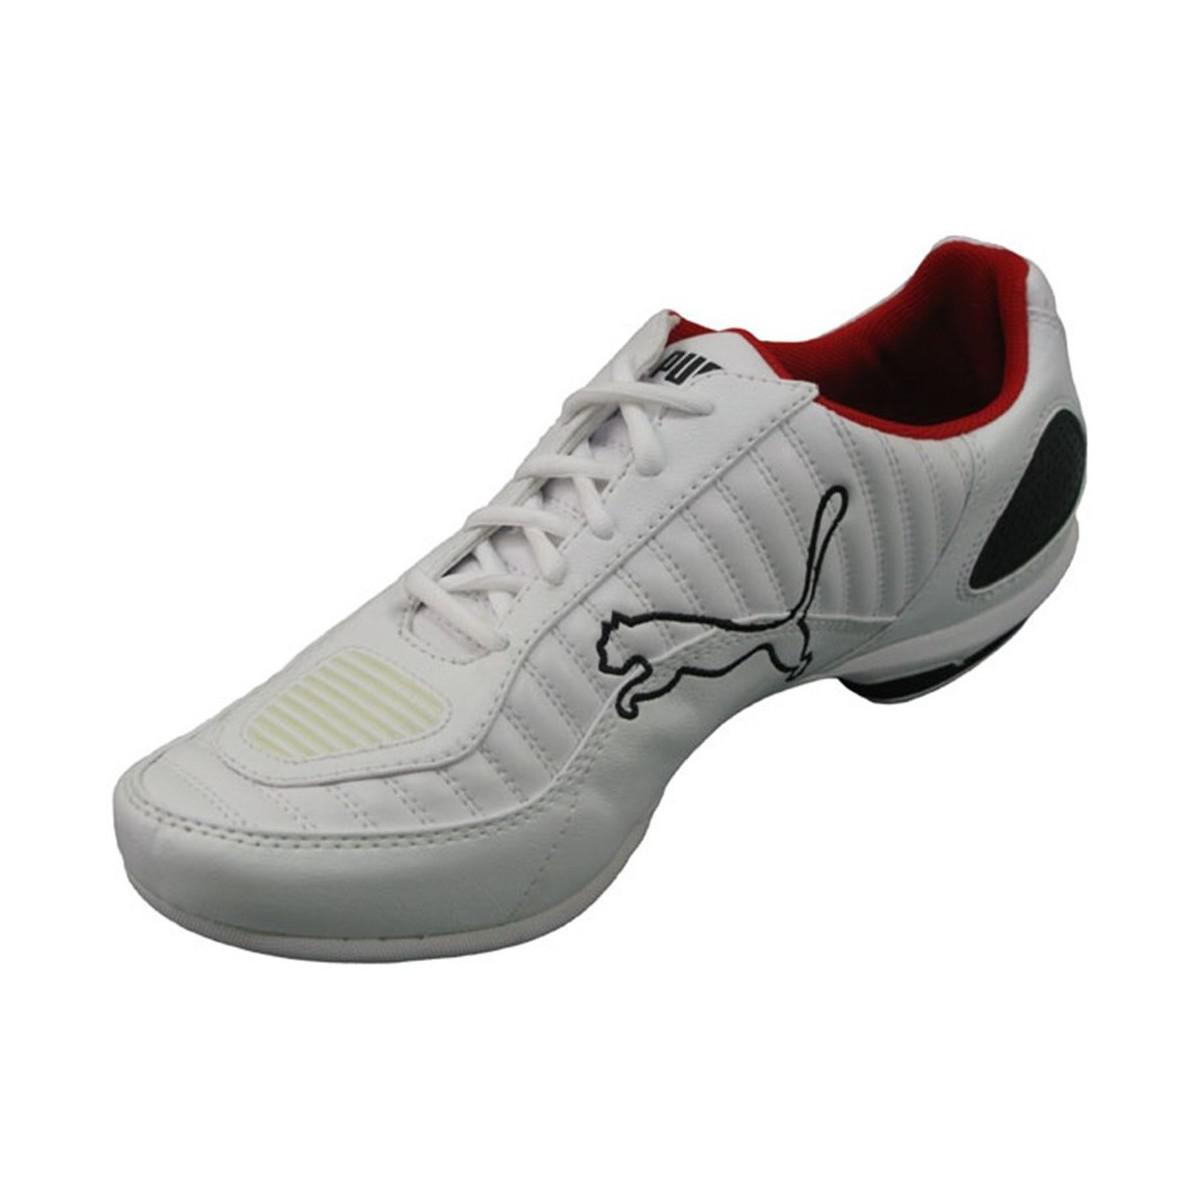 PUMA Ducati Ltwin Men's Shoes (trainers) In White for Men - Lyst